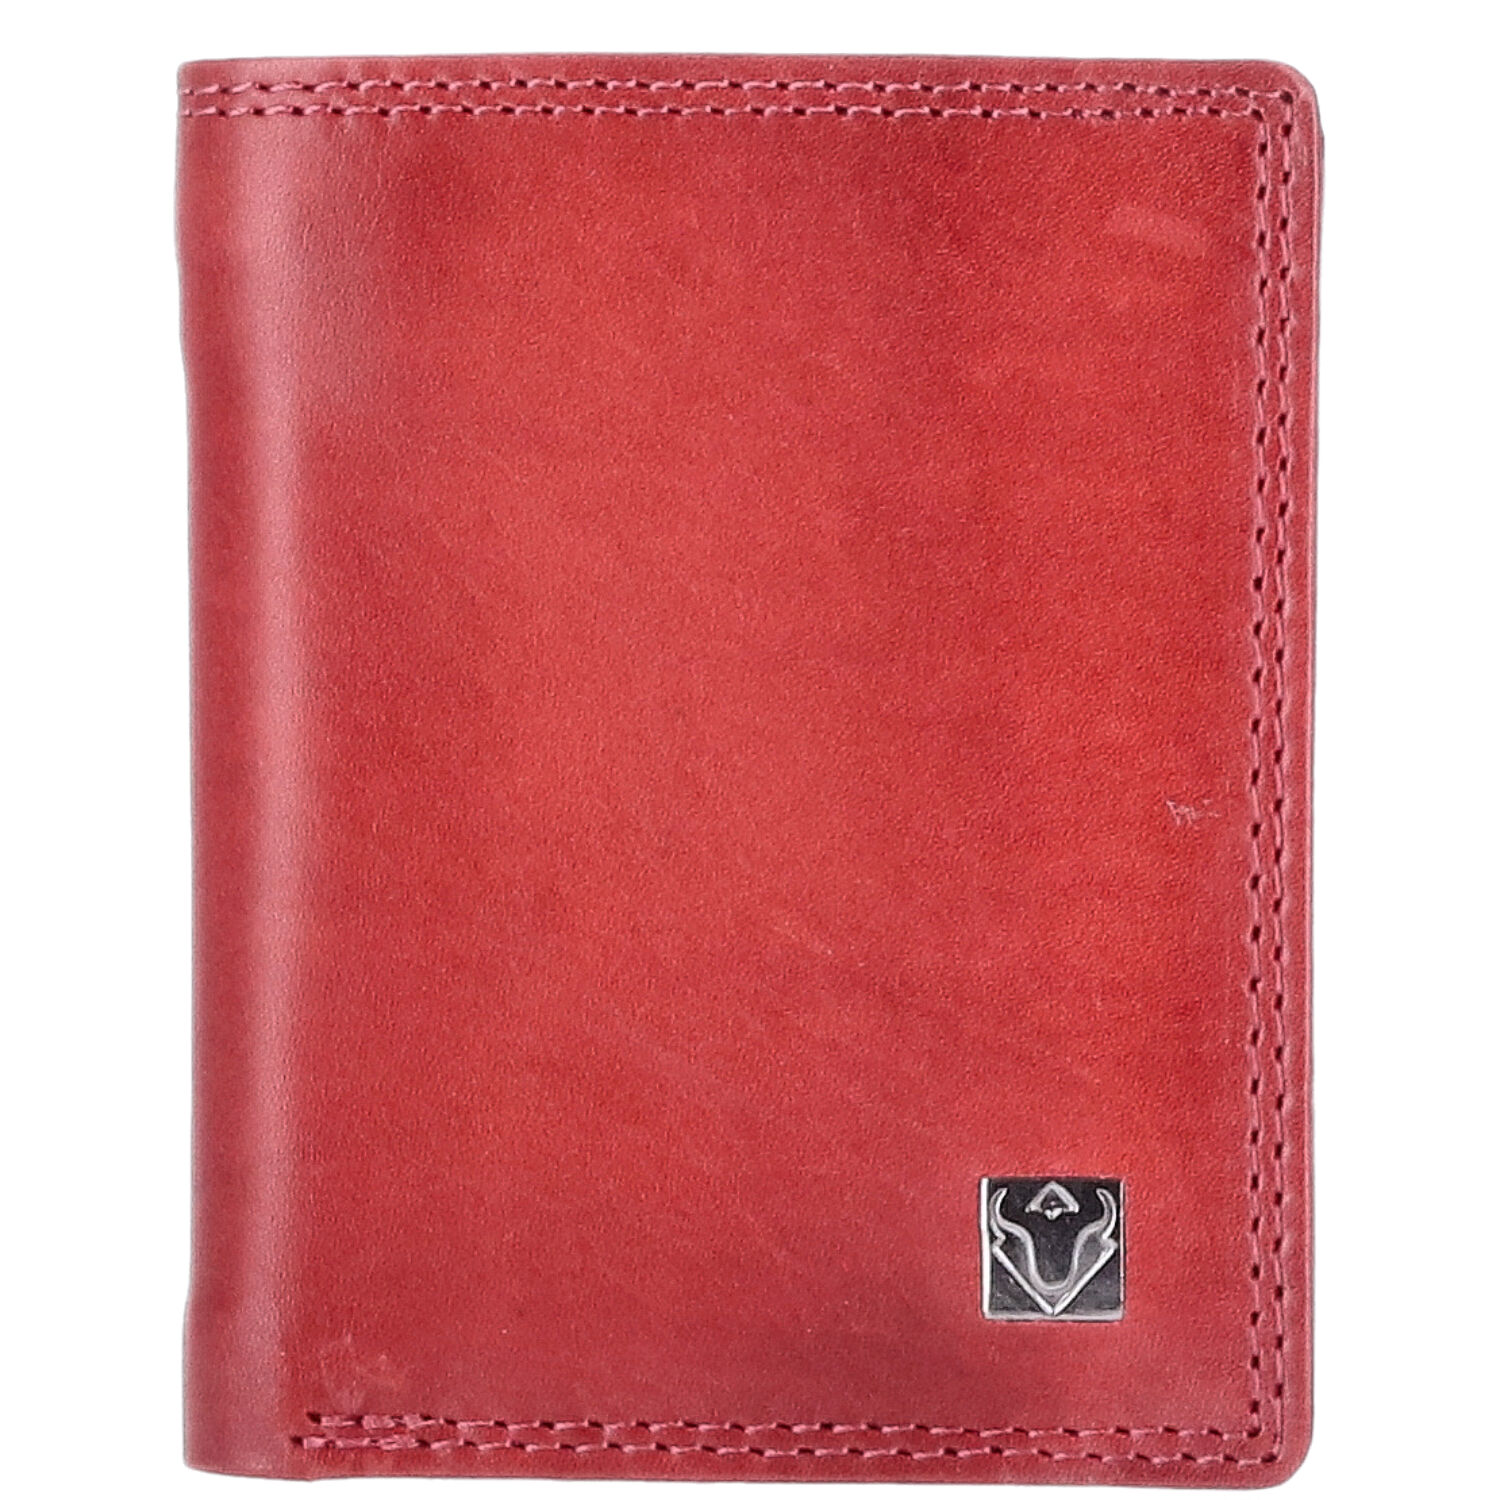 Urban Bull Wallet Washed Leather rot